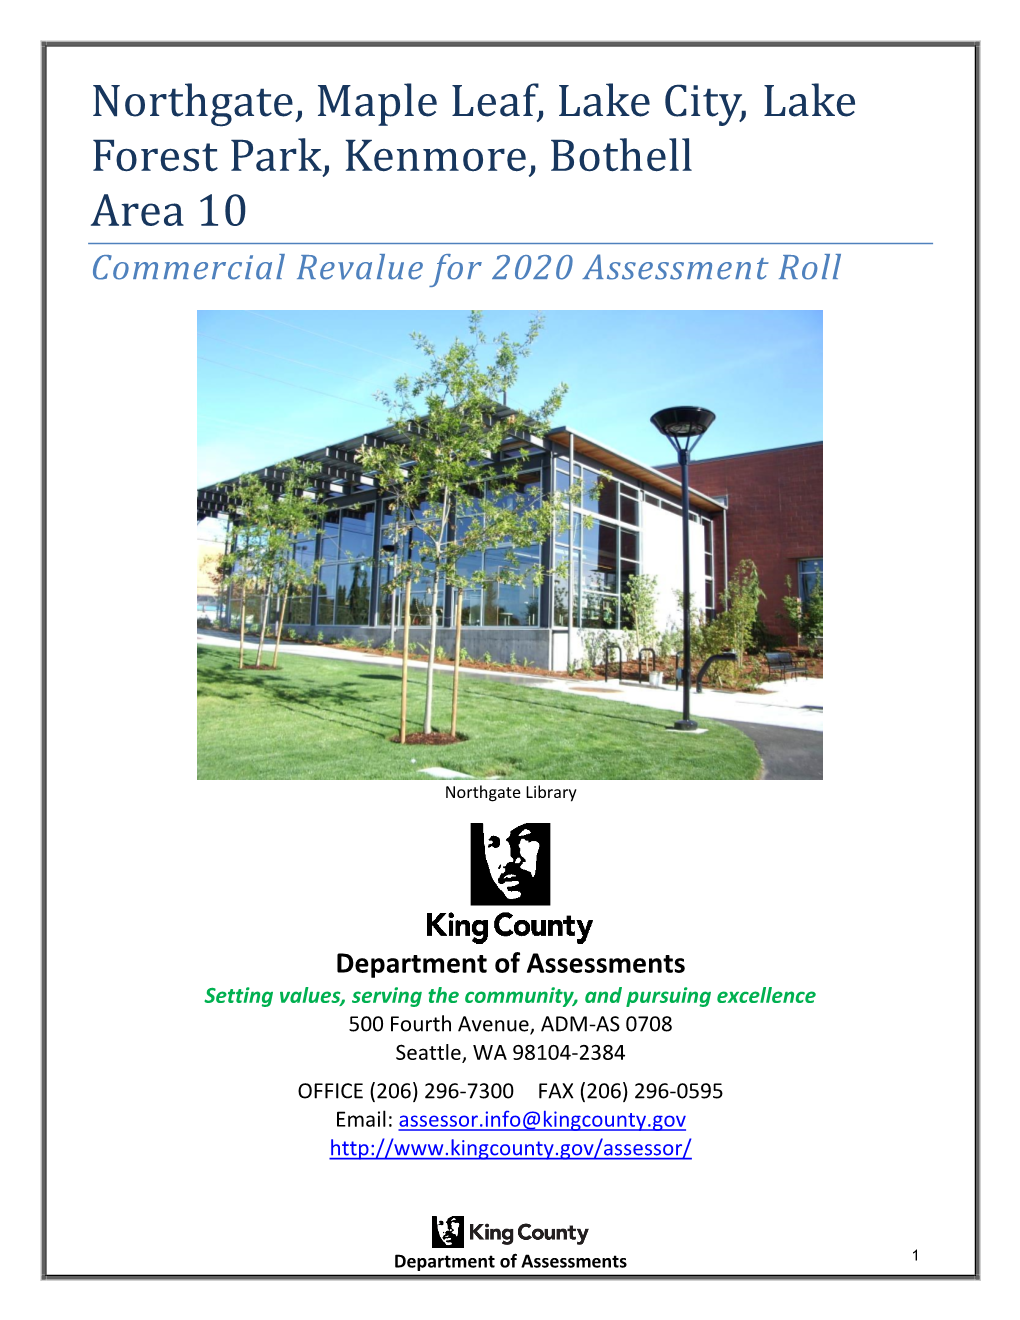 Northgate, Maple Leaf, Lake City, Lake Forest Park, Kenmore, Bothell Area 10 Commercial Revalue for 2020 Assessment Roll